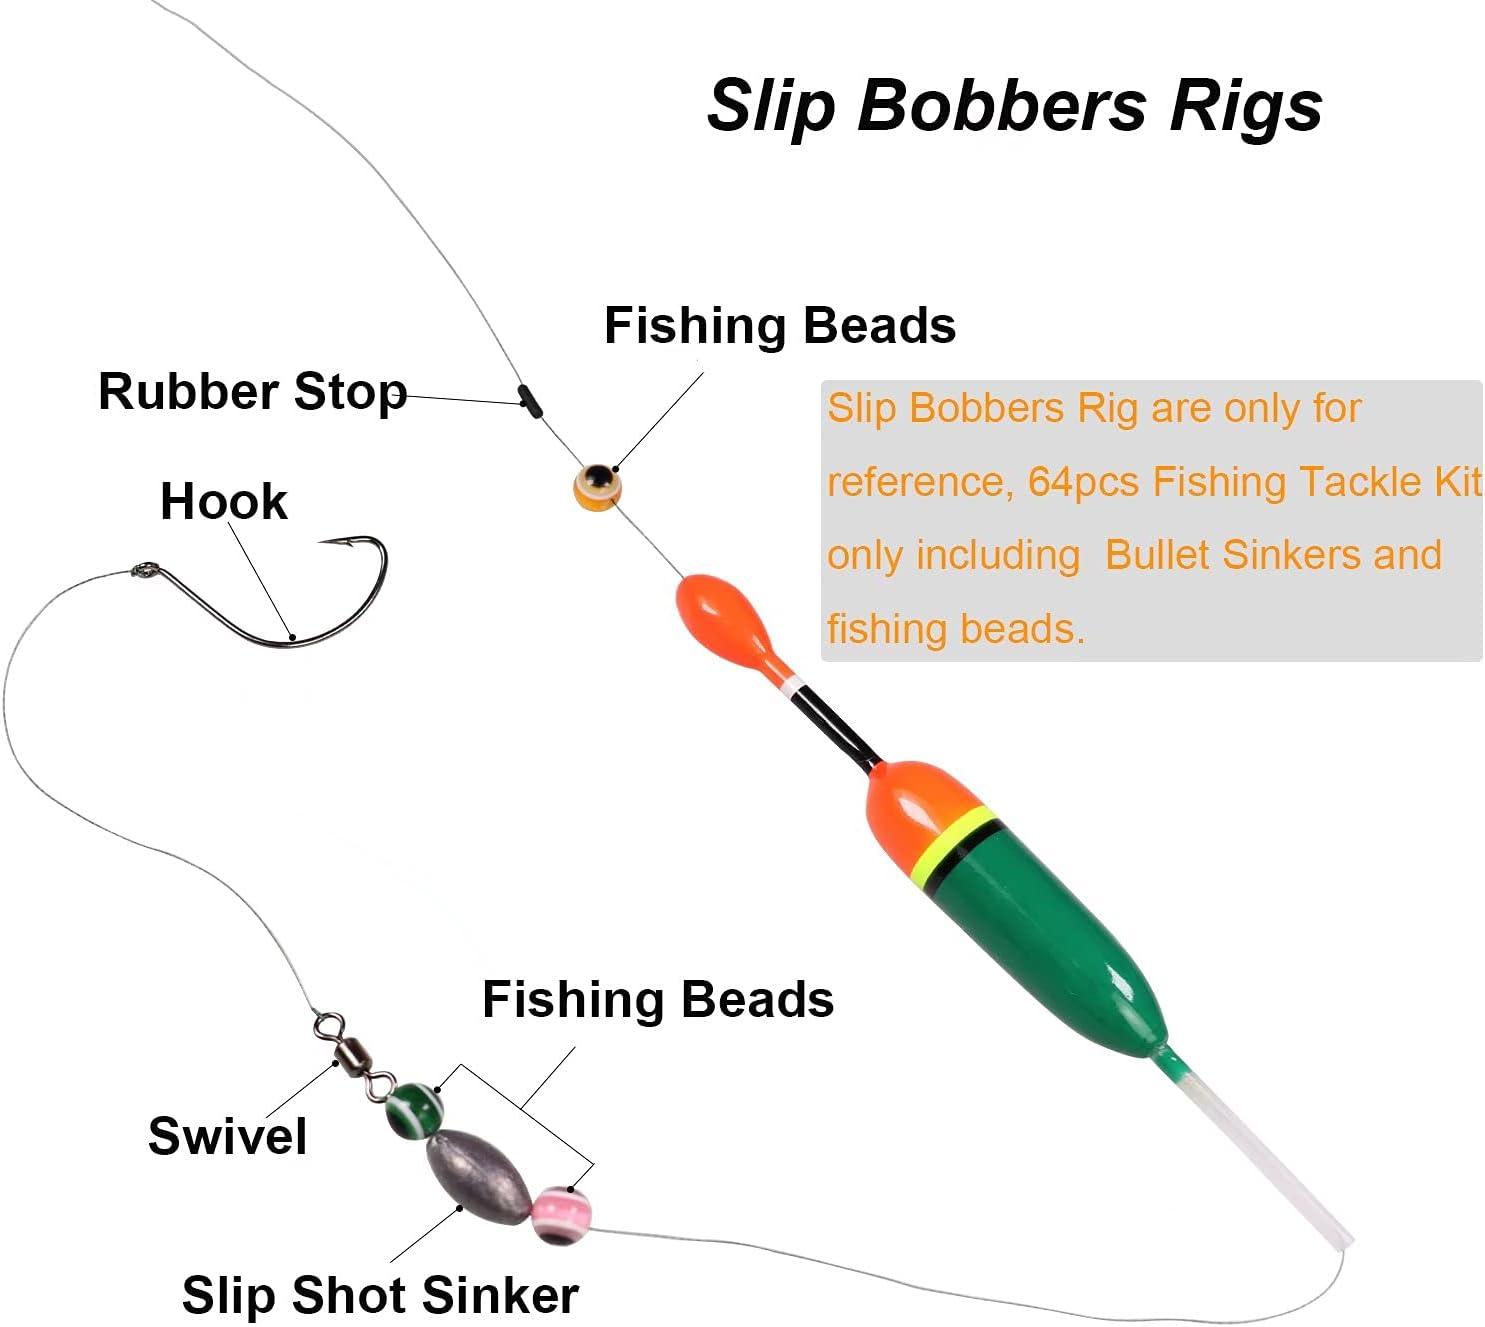  THKFISH Fishing Bobbers Fishing Floats Weighted